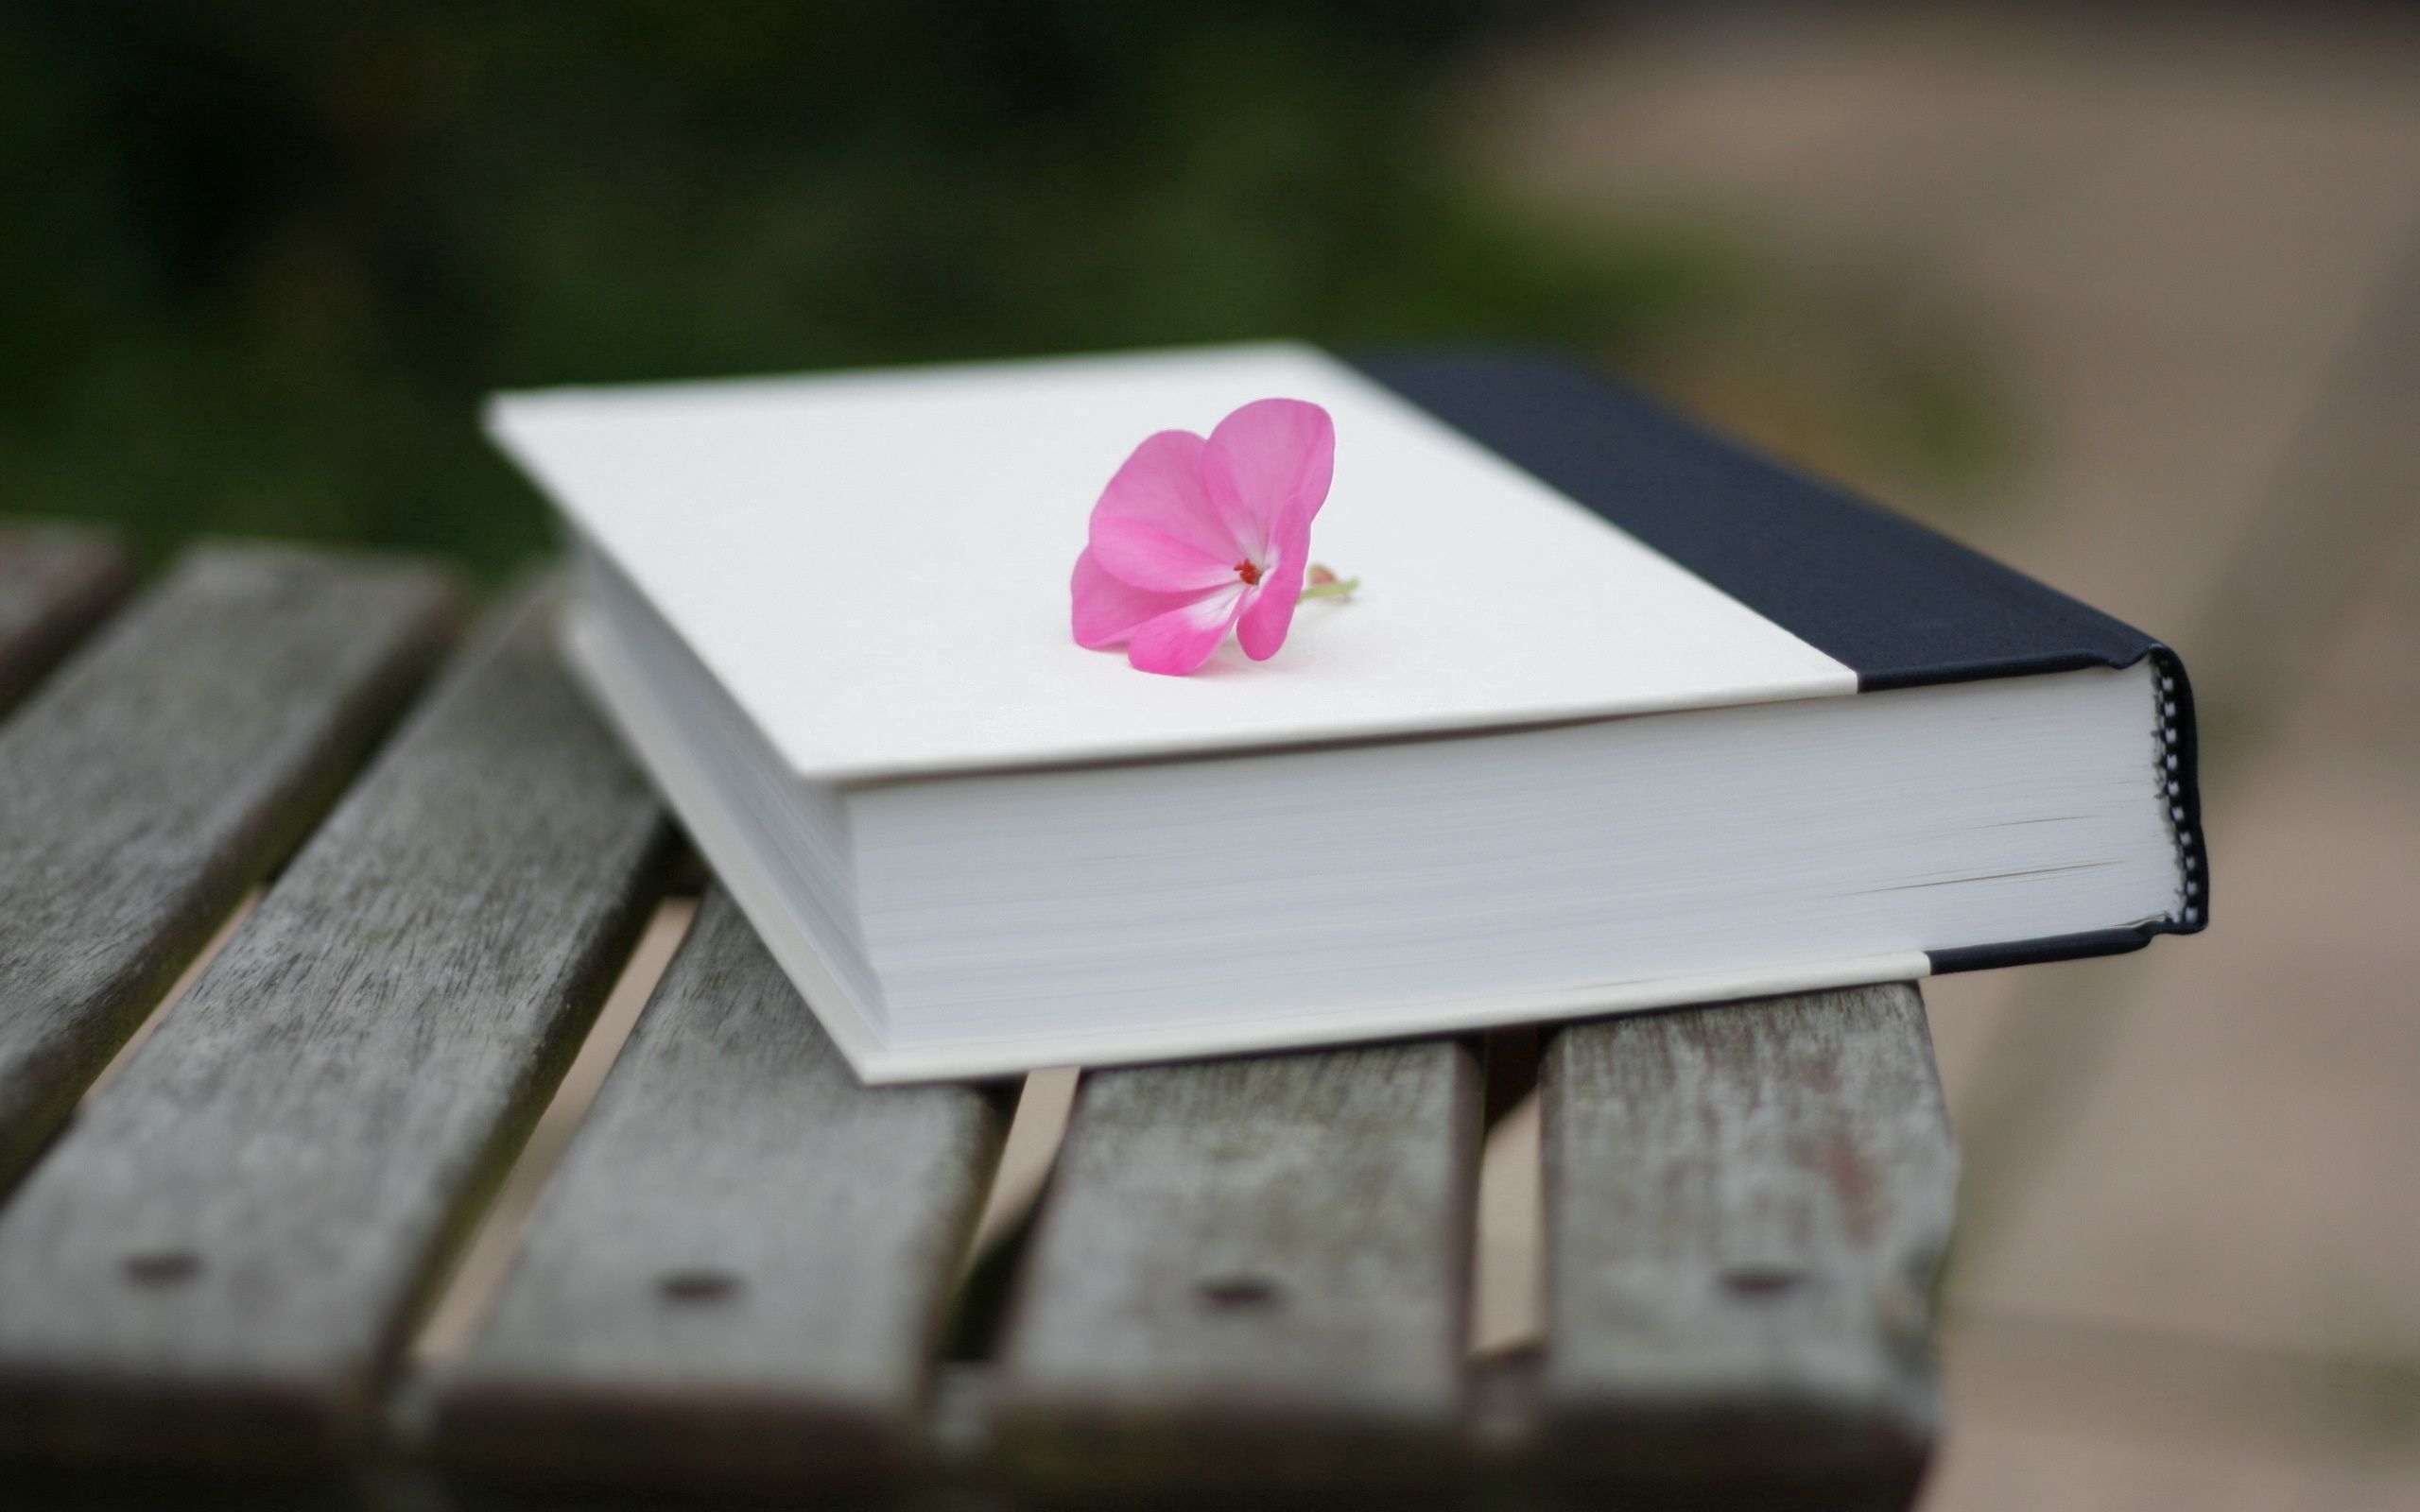 Download PC Wallpaper smooth, flower, miscellanea, miscellaneous, blur, book, bench, handsomely, it's beautiful